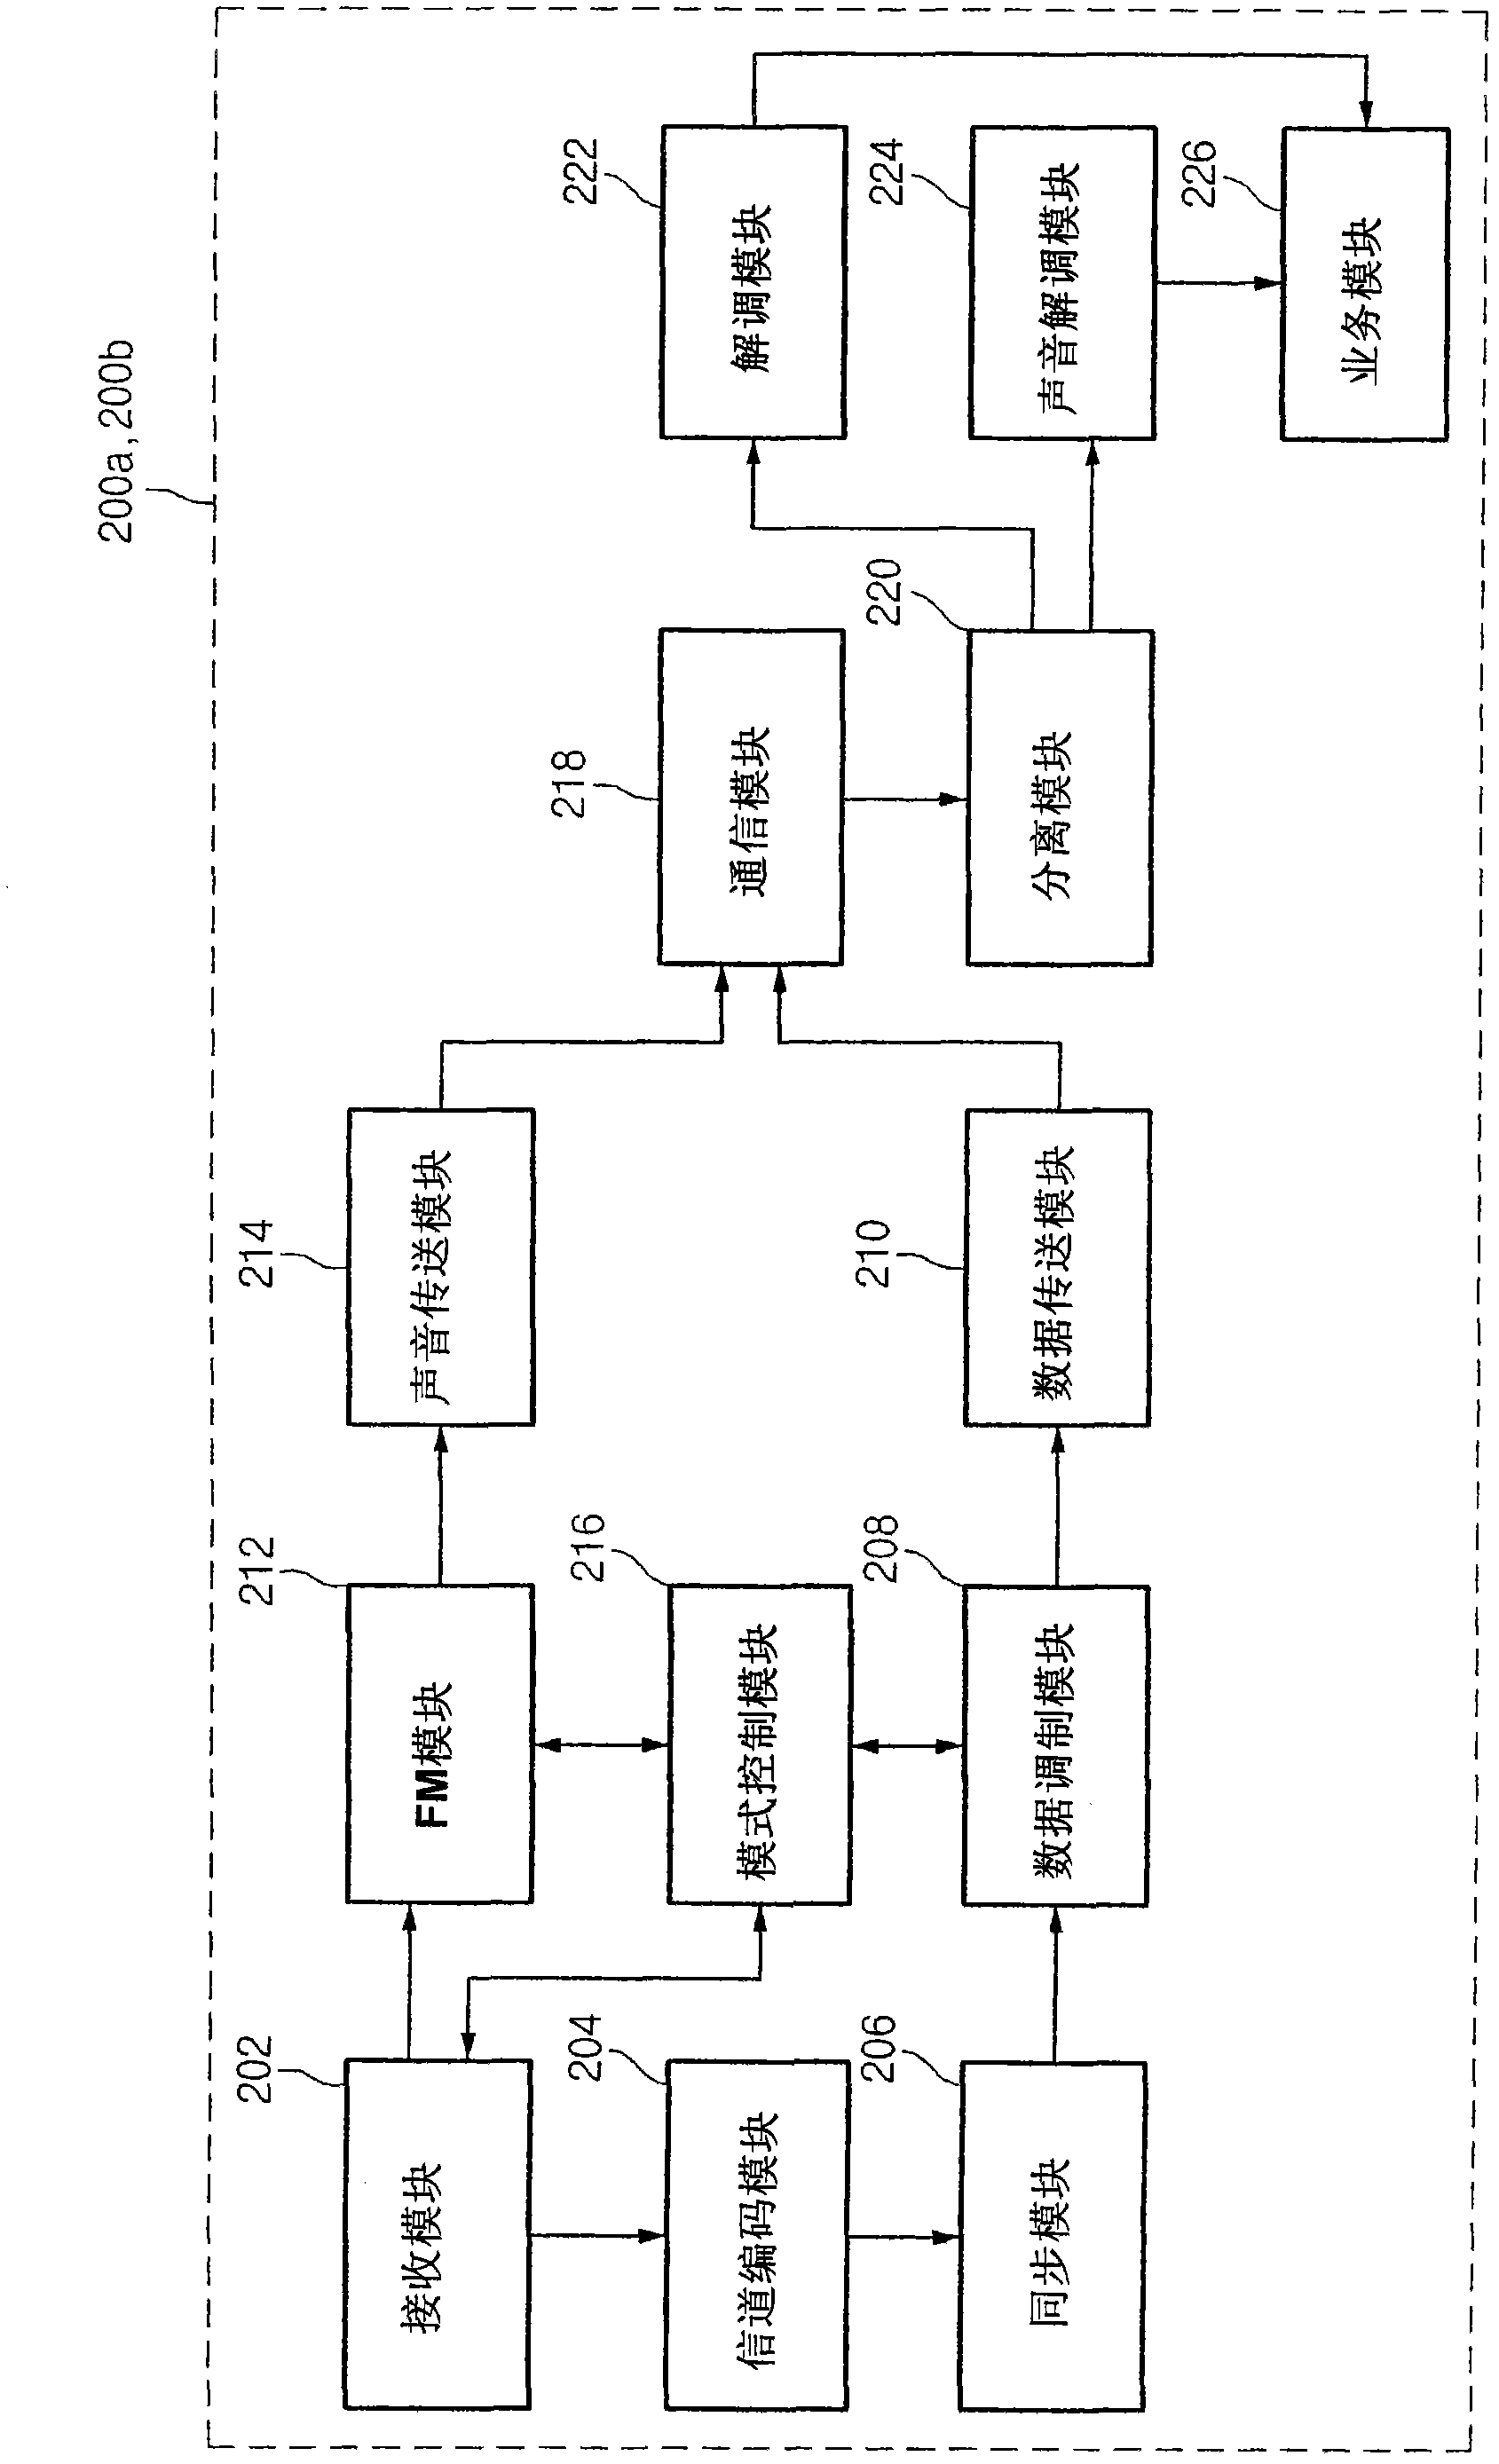 Apparatus and method for data communication using radio frequency